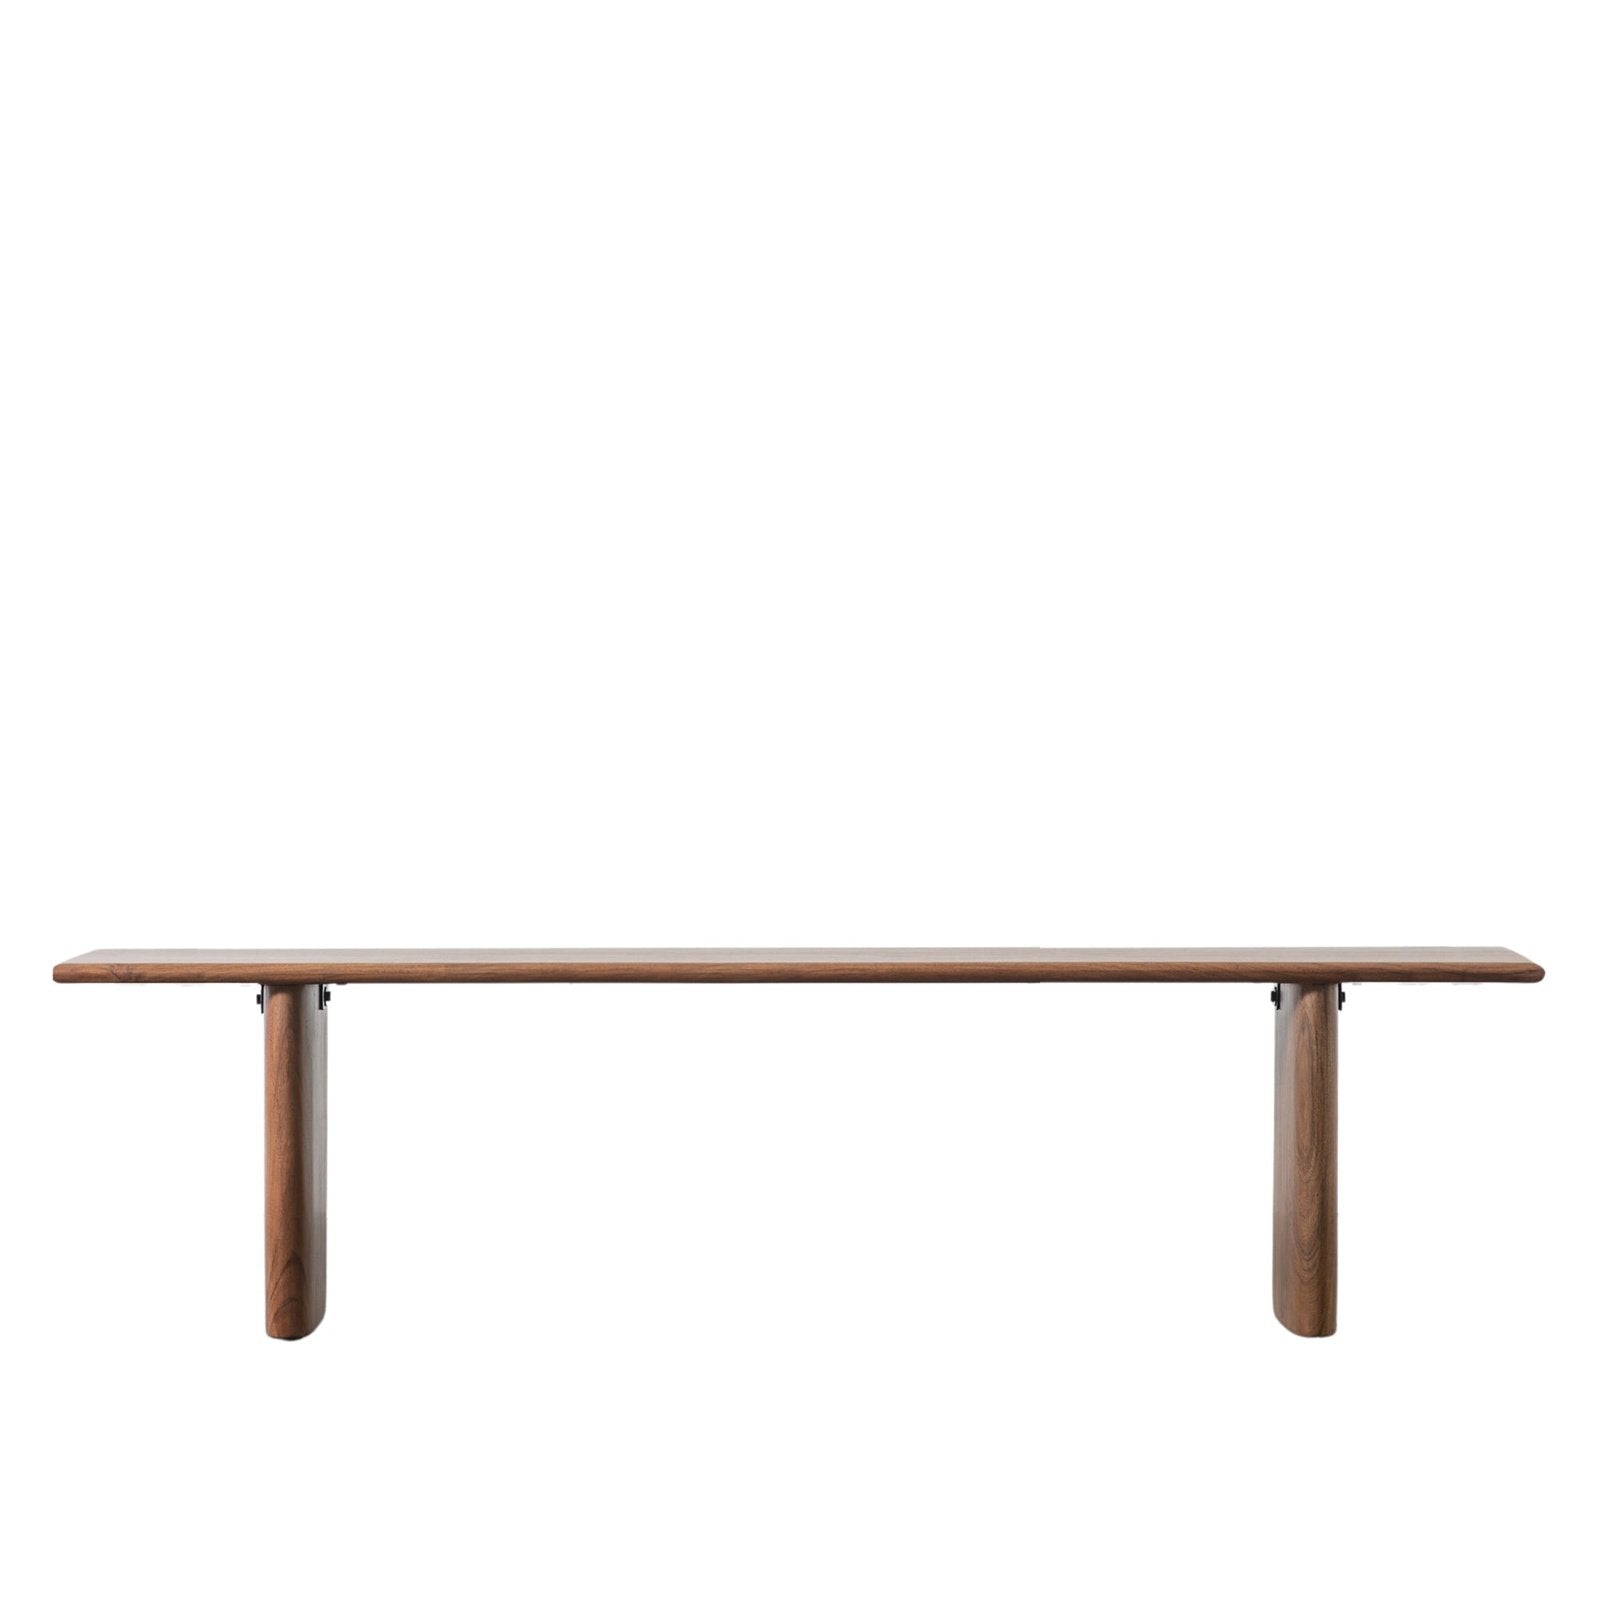 Cashmere Dining Bench - Solid Acacia Wood & Iron - Warm Natural Finish - Modern Rustic Style